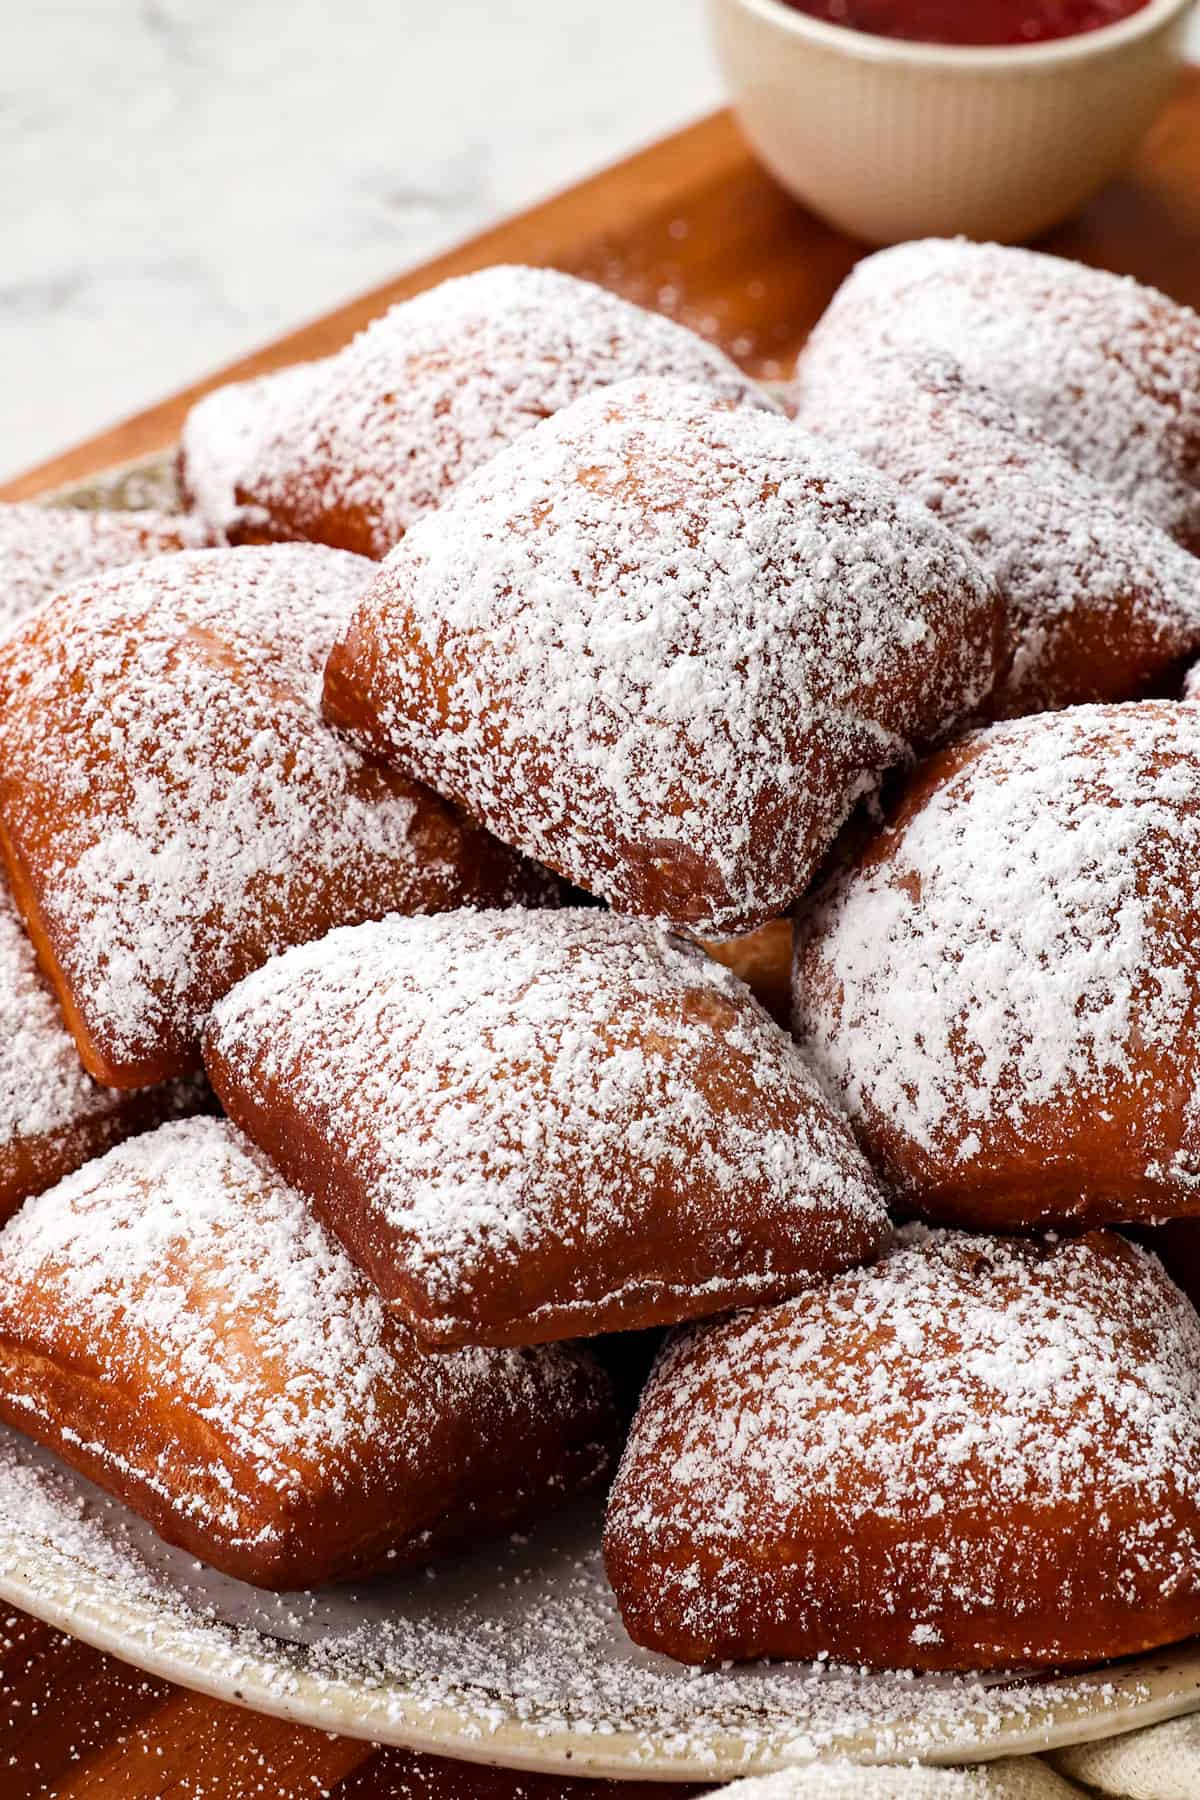 a plate of homemade beignets showing how thick and puffy they are